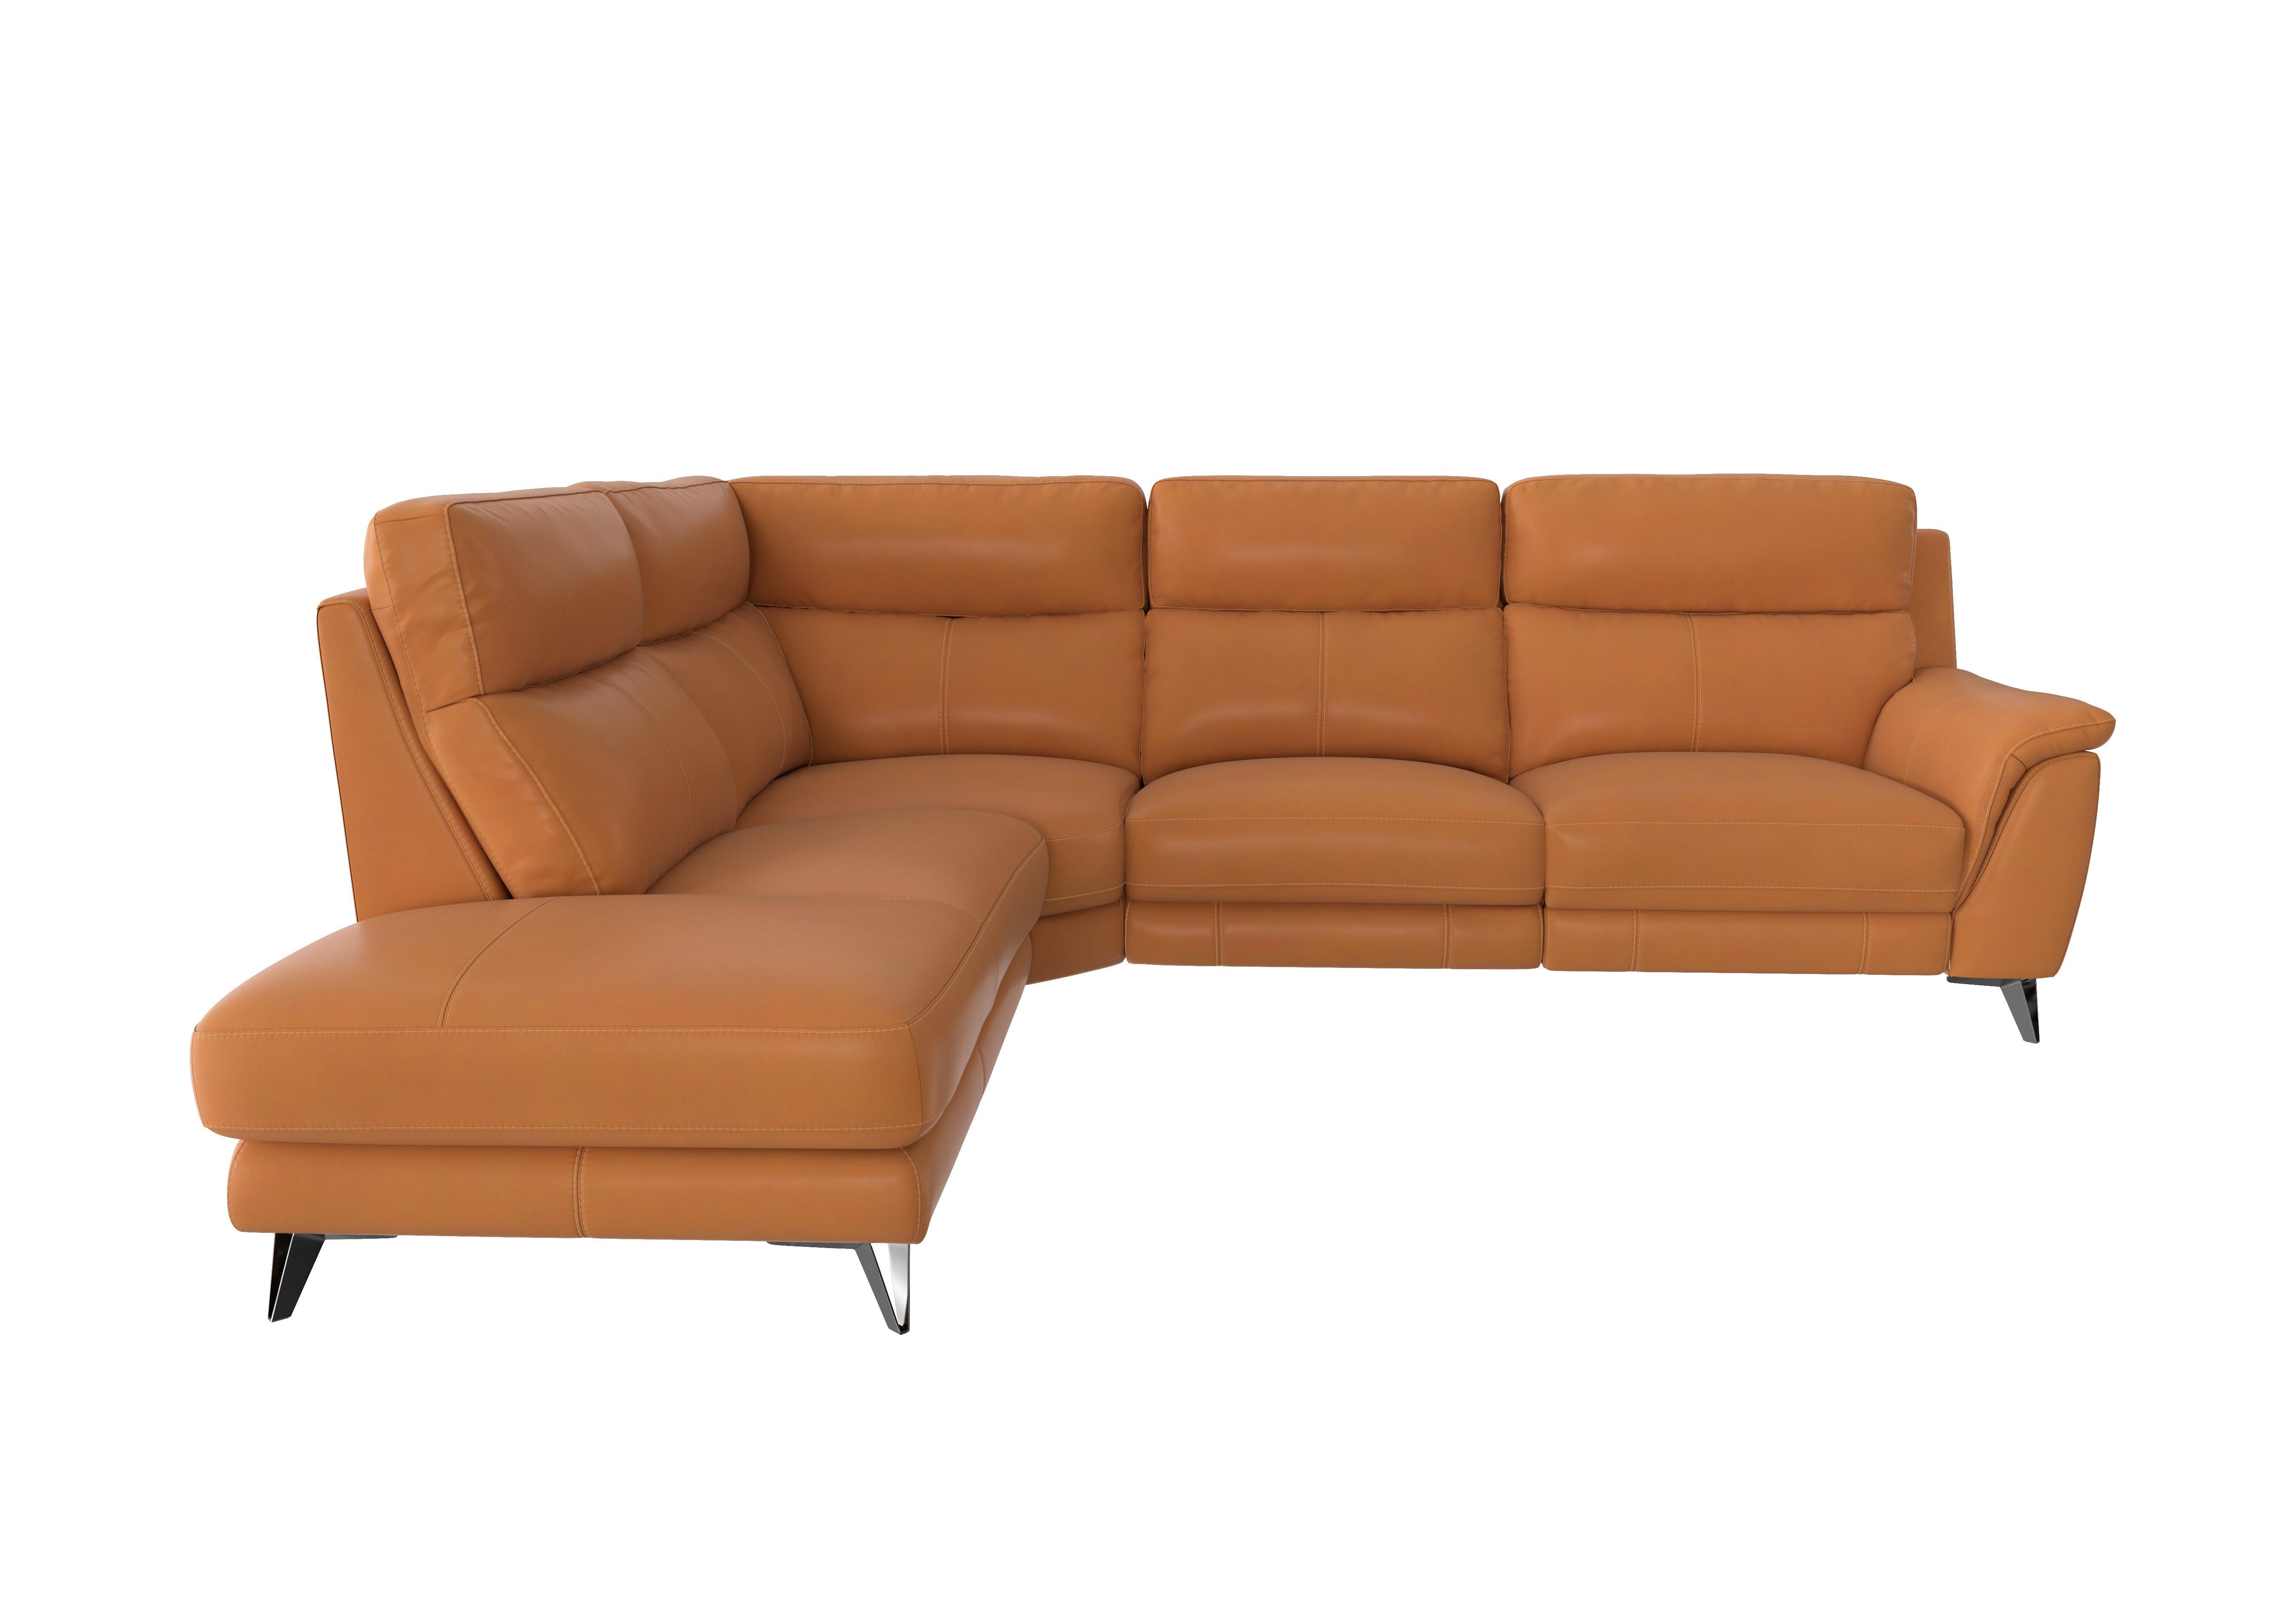 Contempo Chaise End Leather Sofa in Bv-335e Honey Yellow on Furniture Village